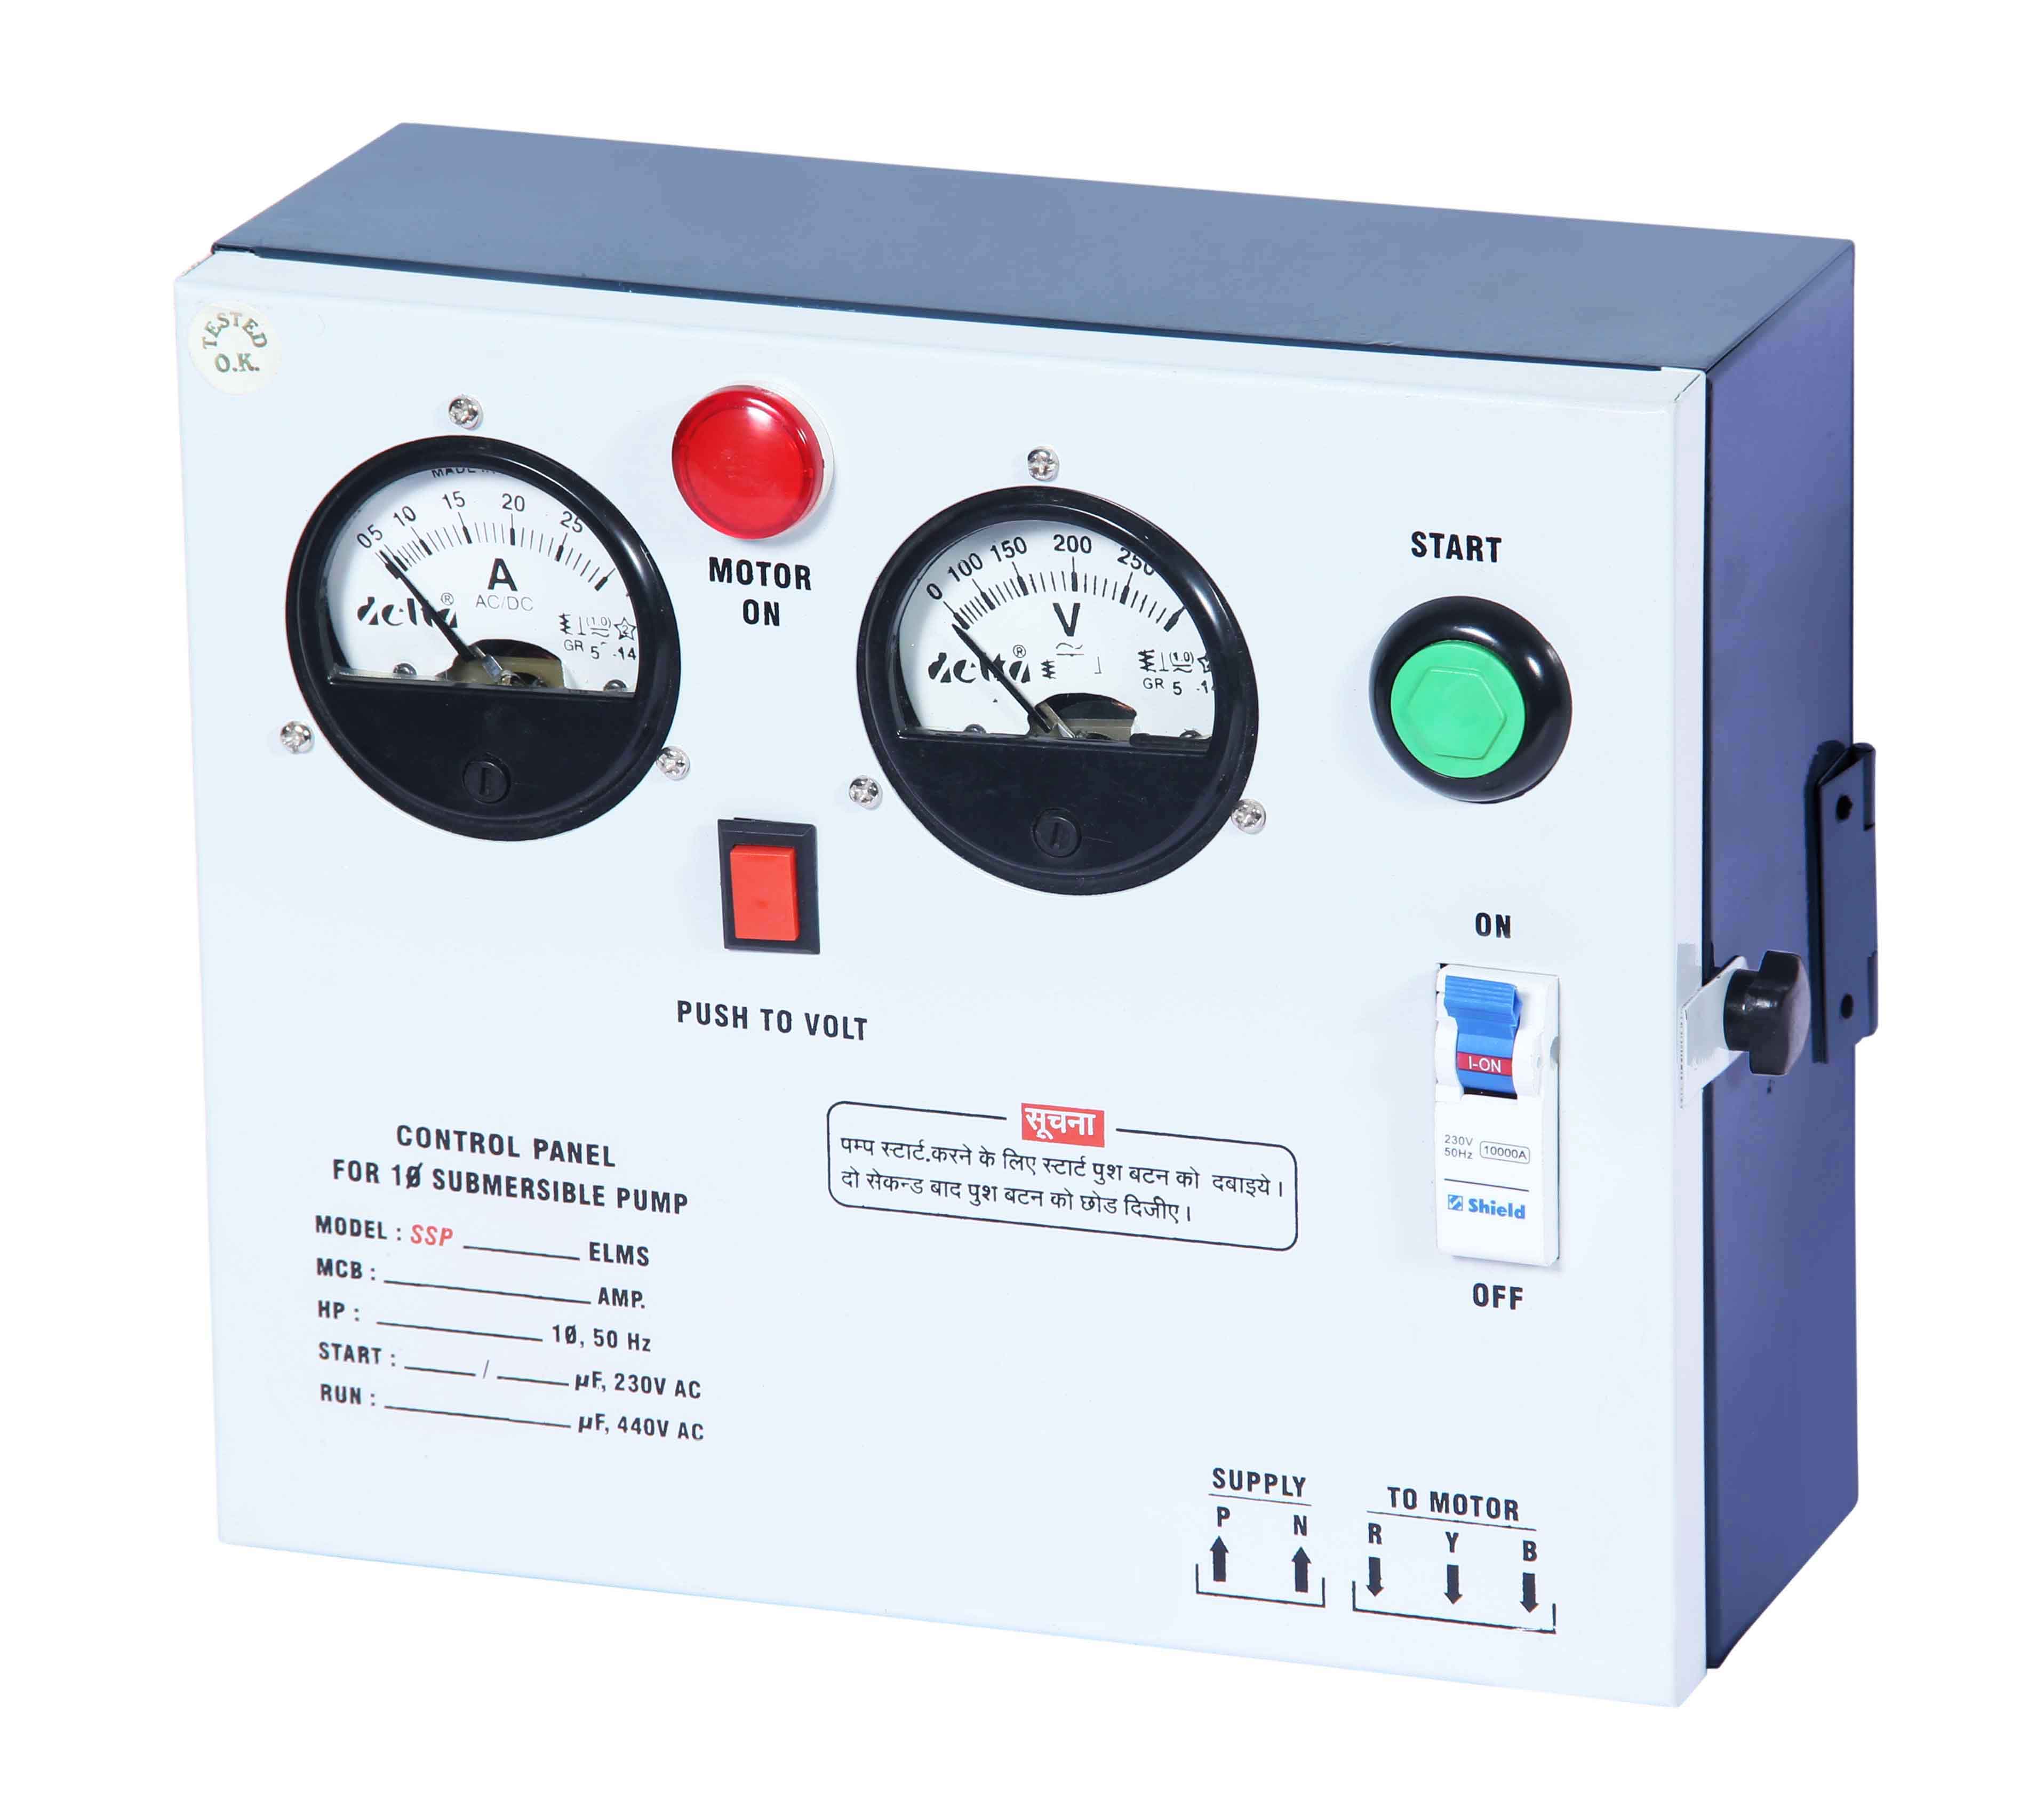 ELMS Single phase motor starter suitable up to 1.5 HP submersible motor with overload protections by MCB